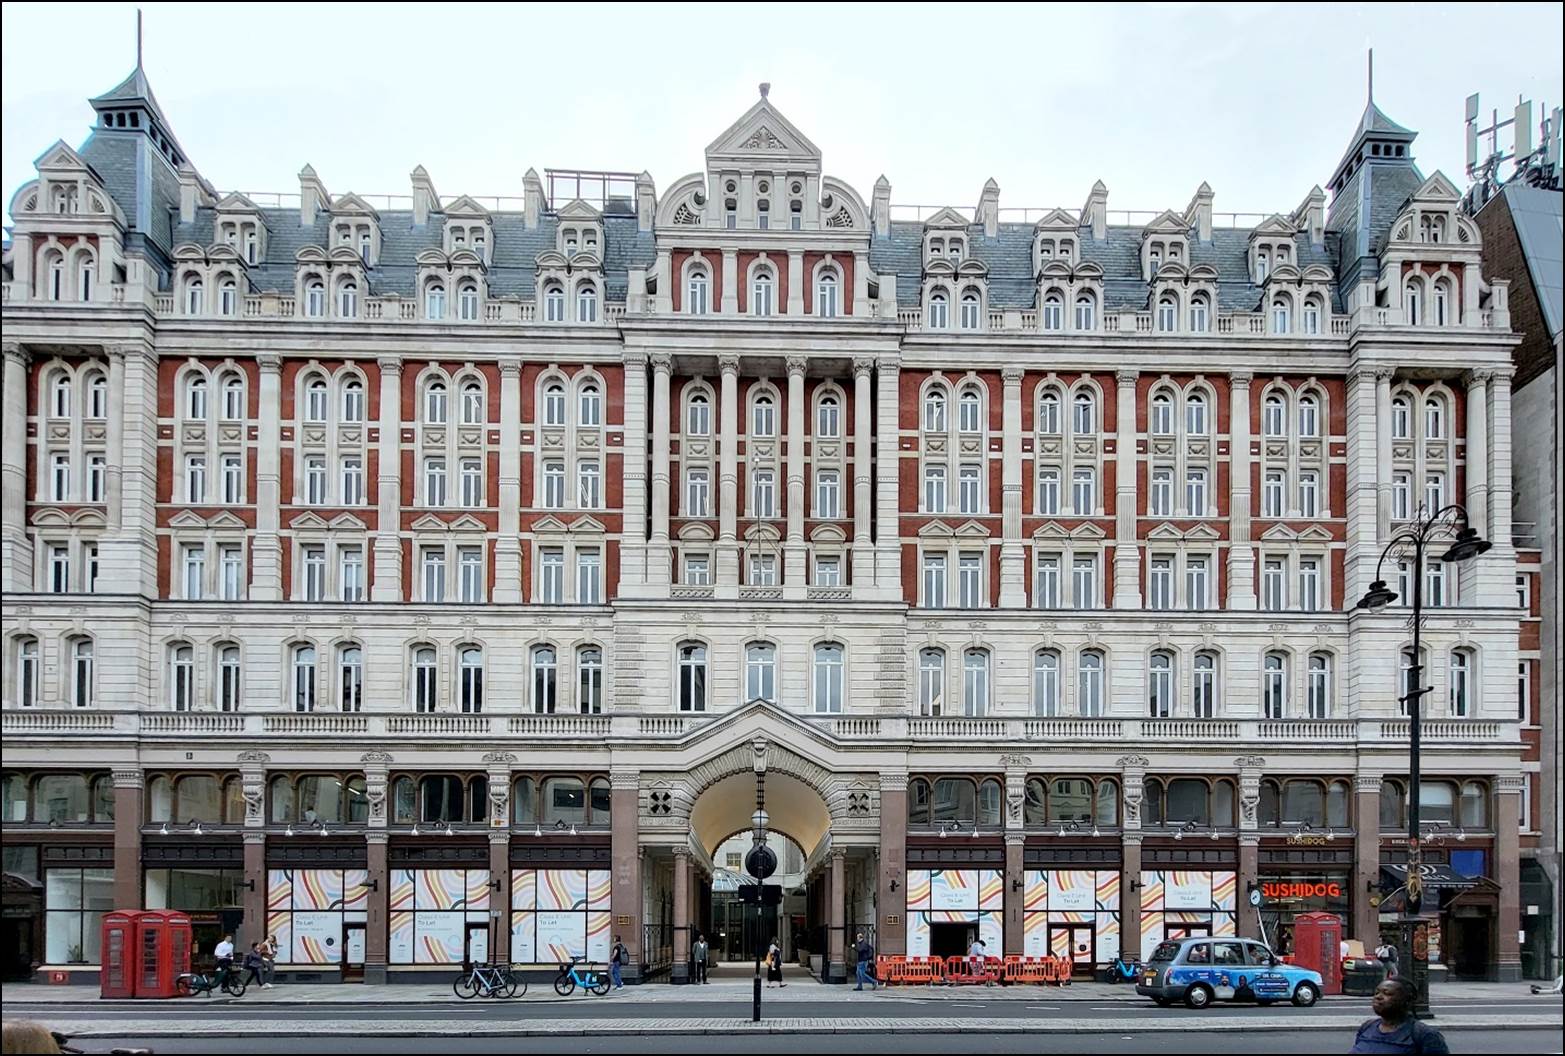 A large building with many windows

Description automatically generated